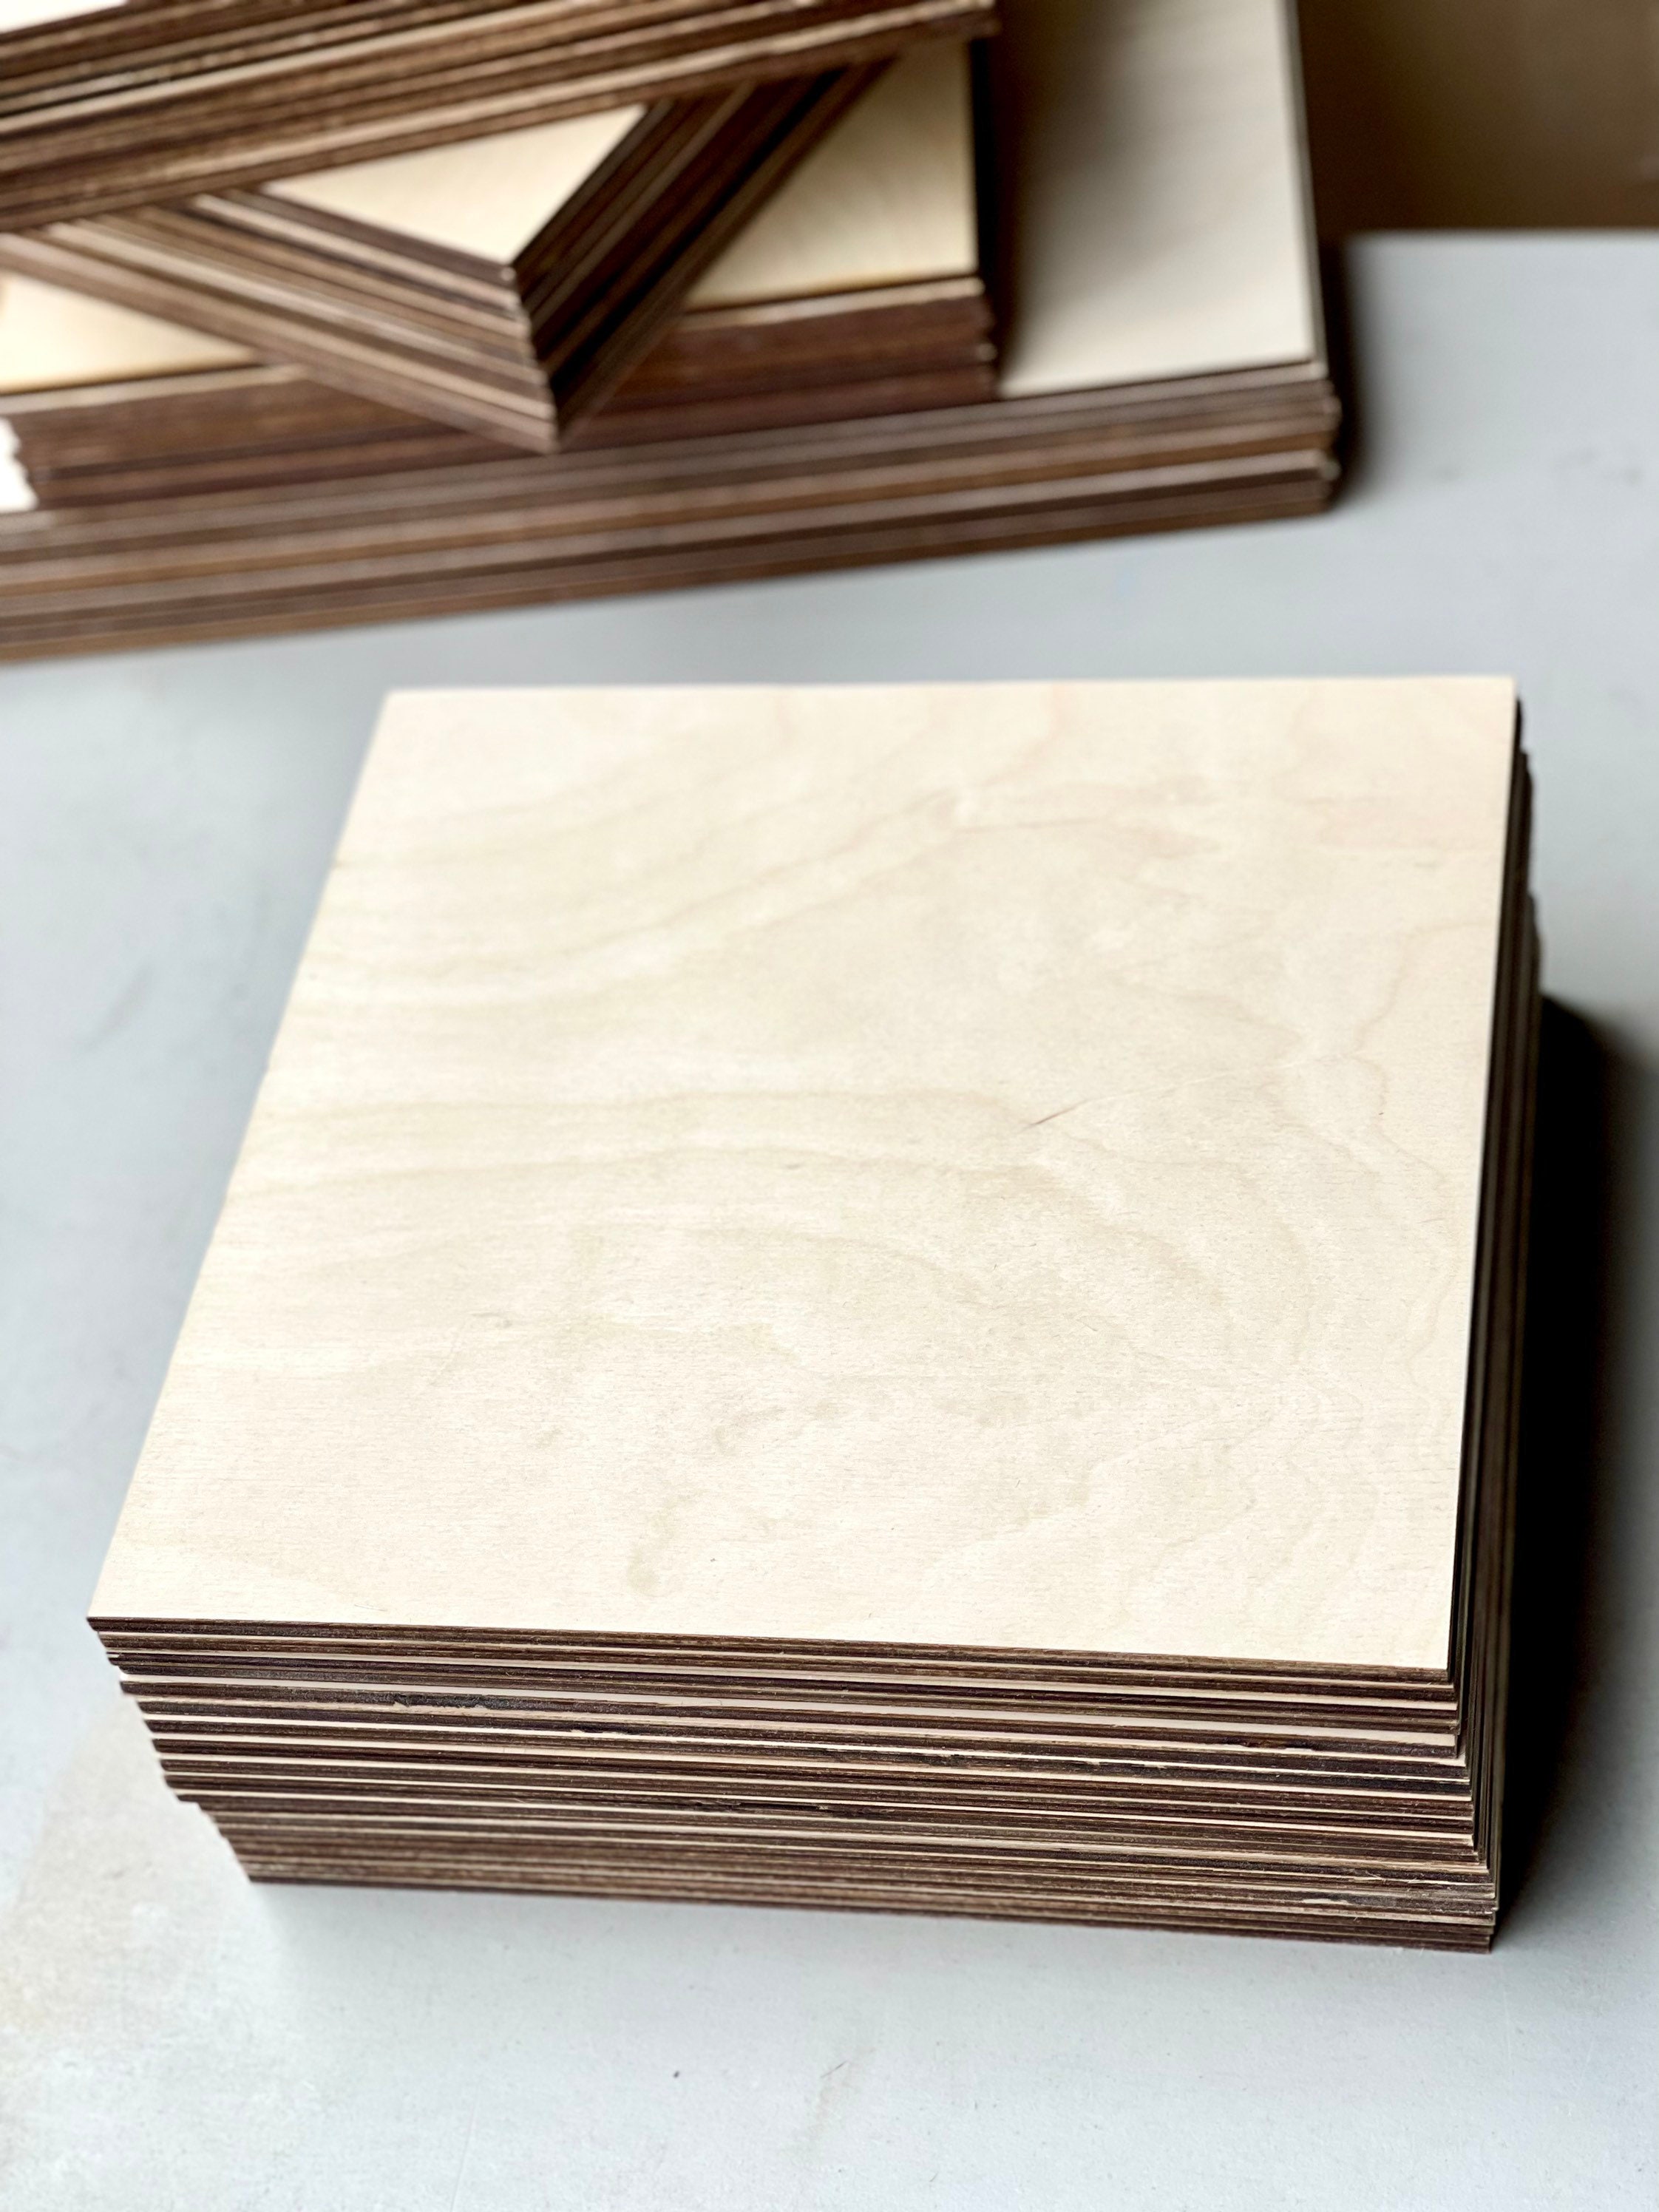 6mm, 1/4 x 8 x 12 Unfinished Baltic Birch plywood sheets